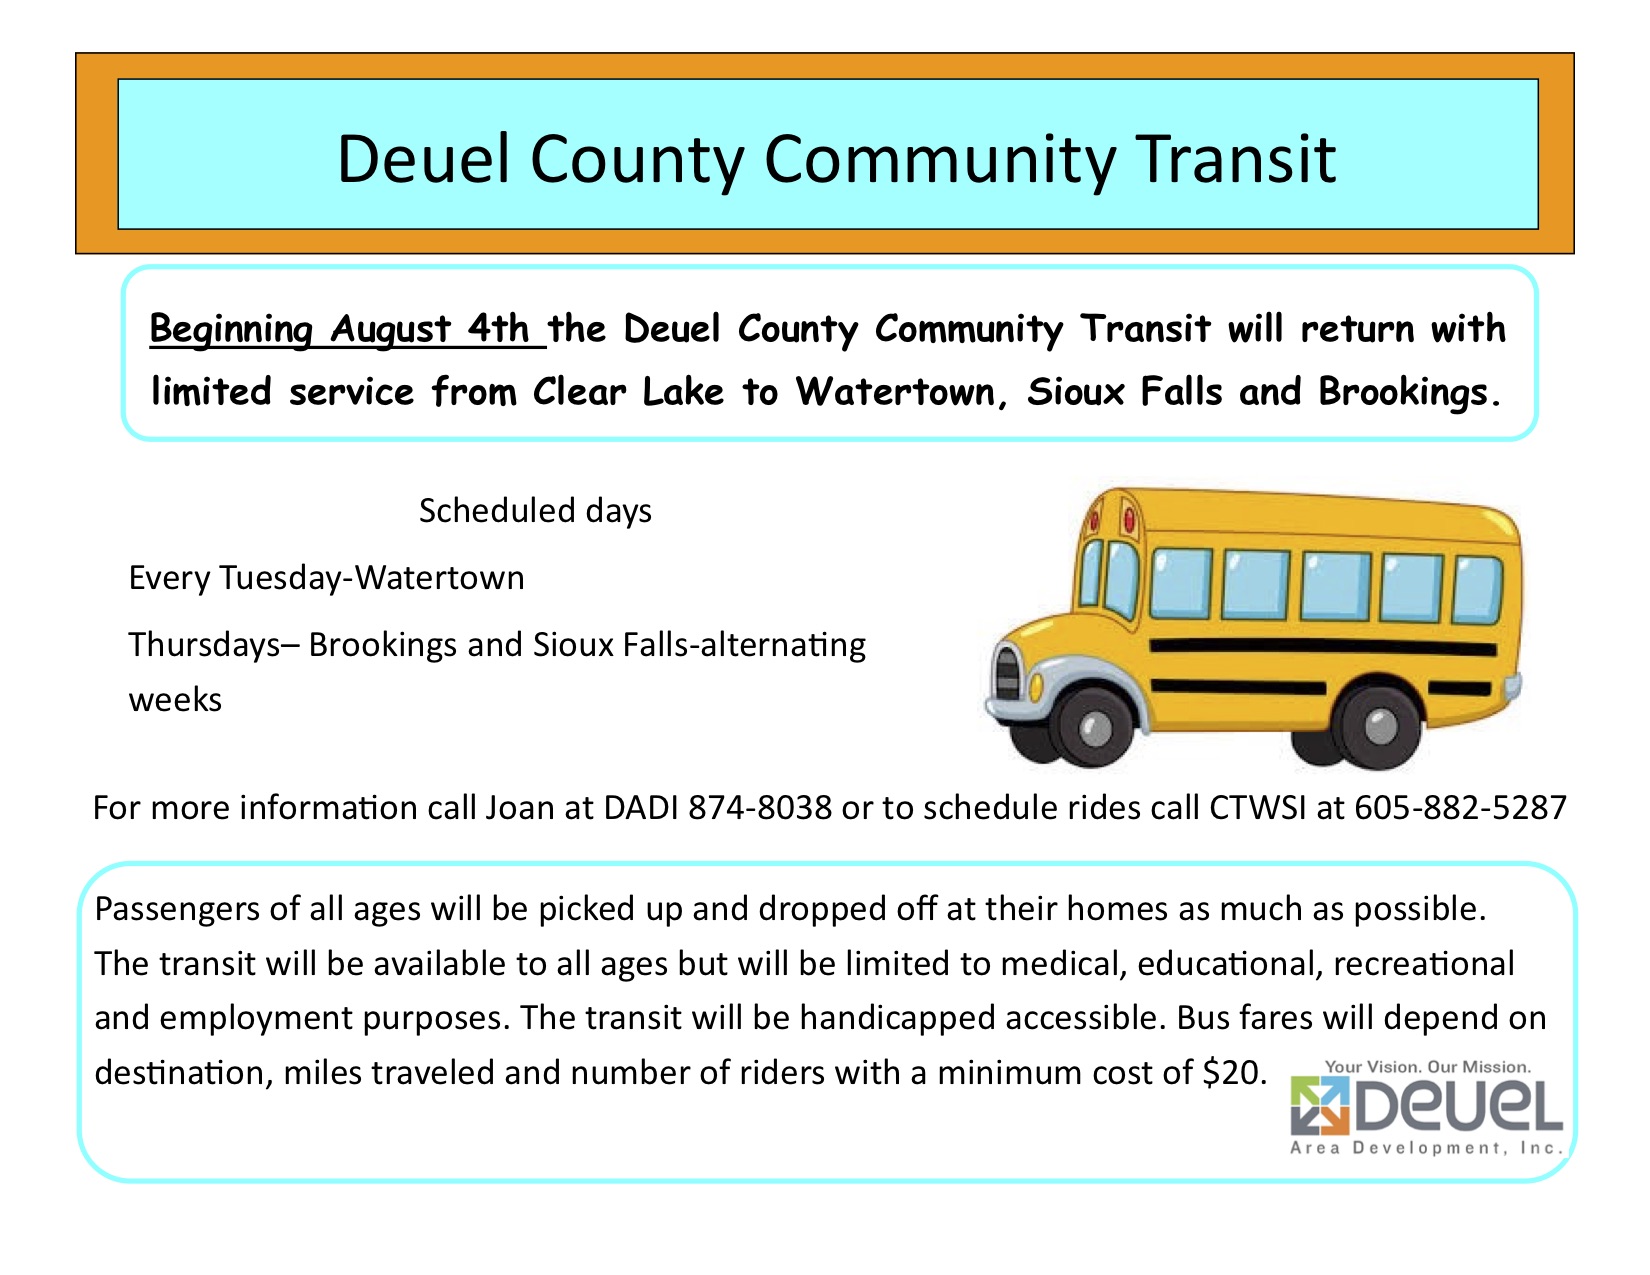 Deuel County Transit - How it Works Photo - Click Here to See